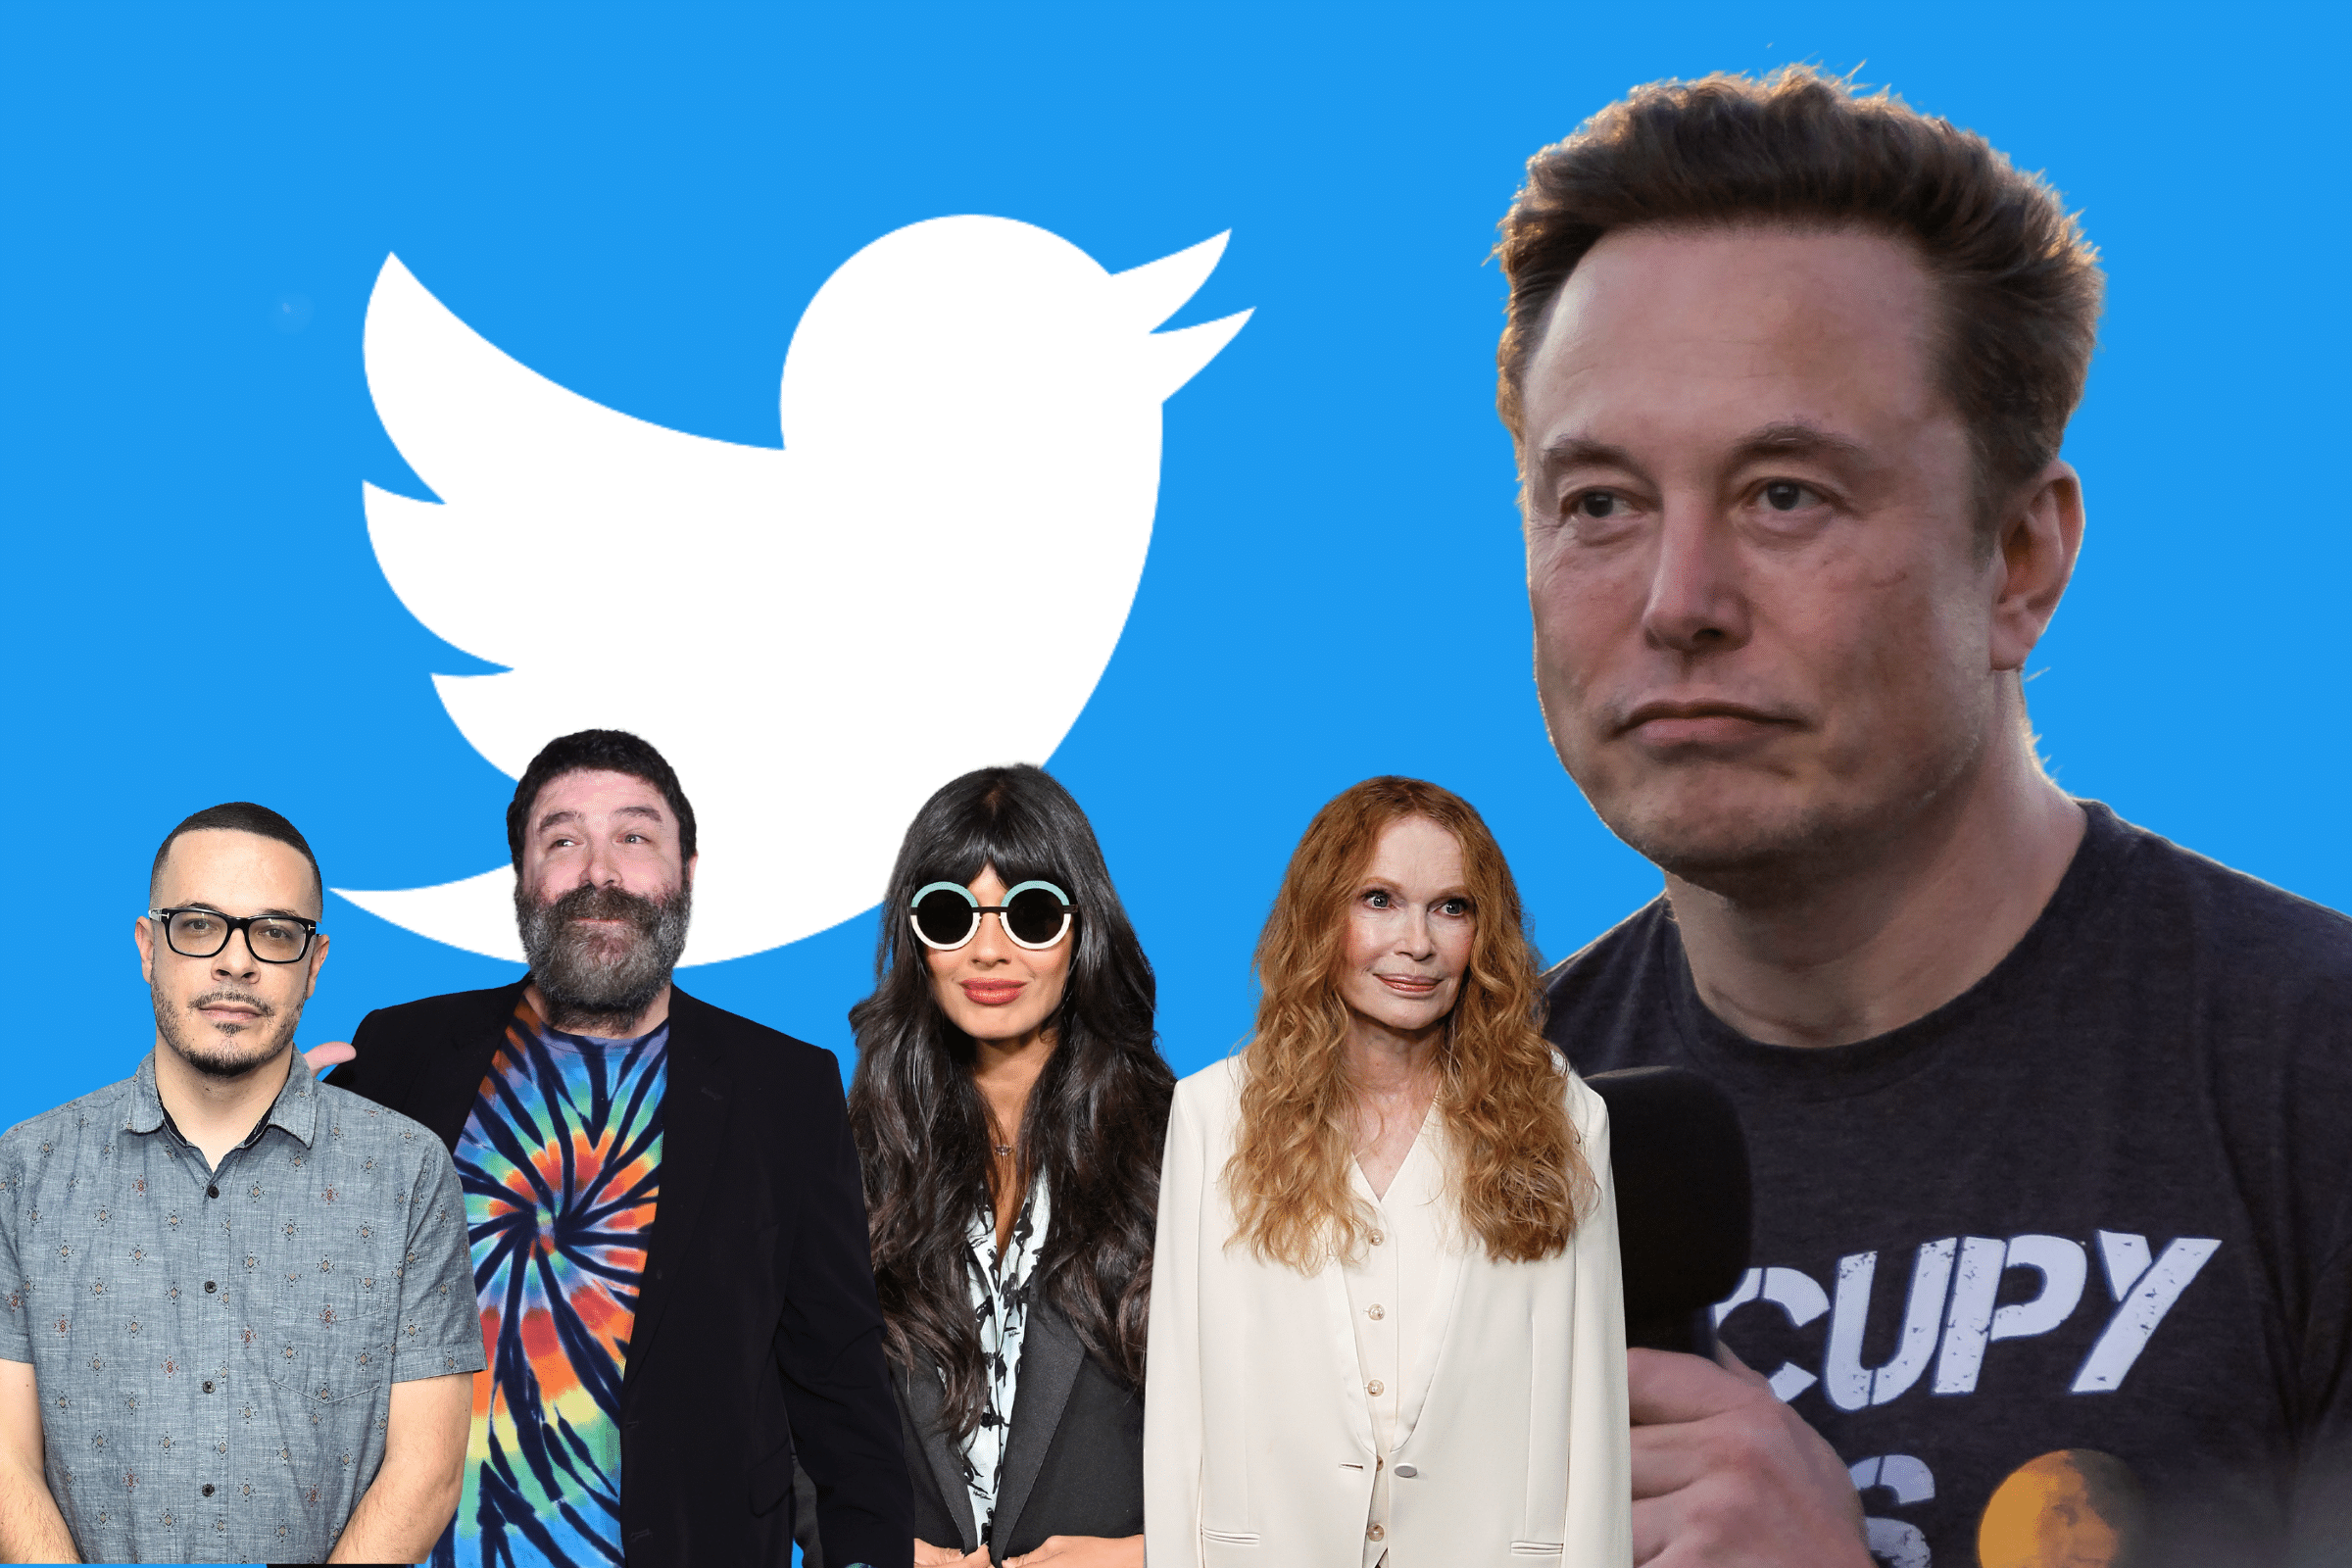 Elon Musk the Twitter celebrity is not the same as Musk the SpaceX